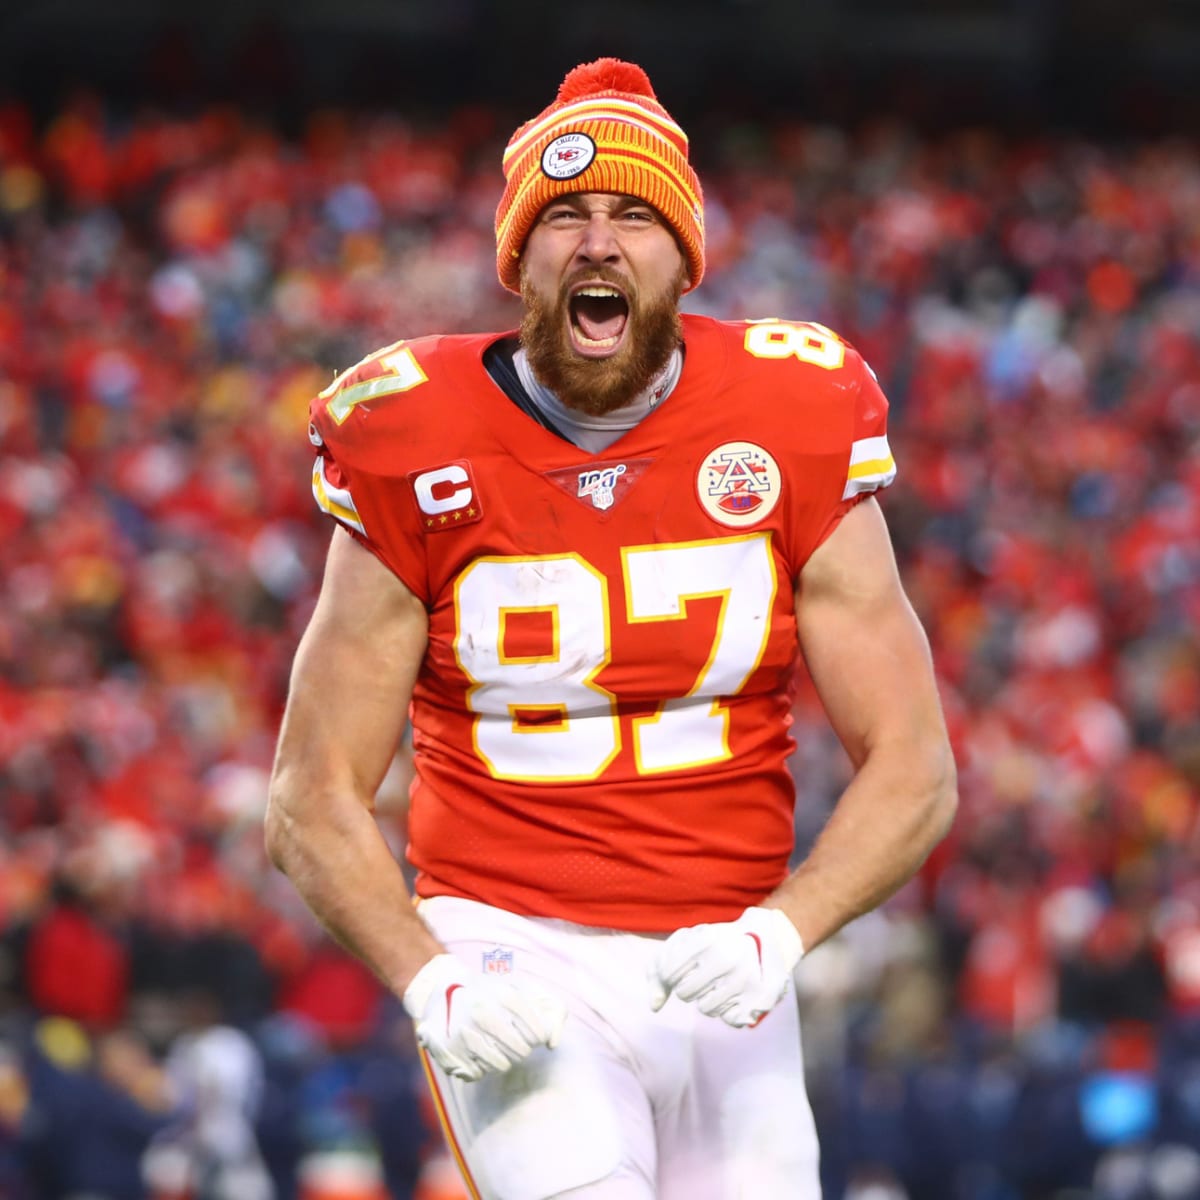 Travis Kelce - Let's go take care of some business.#Gameday  #ChiefsKingdom